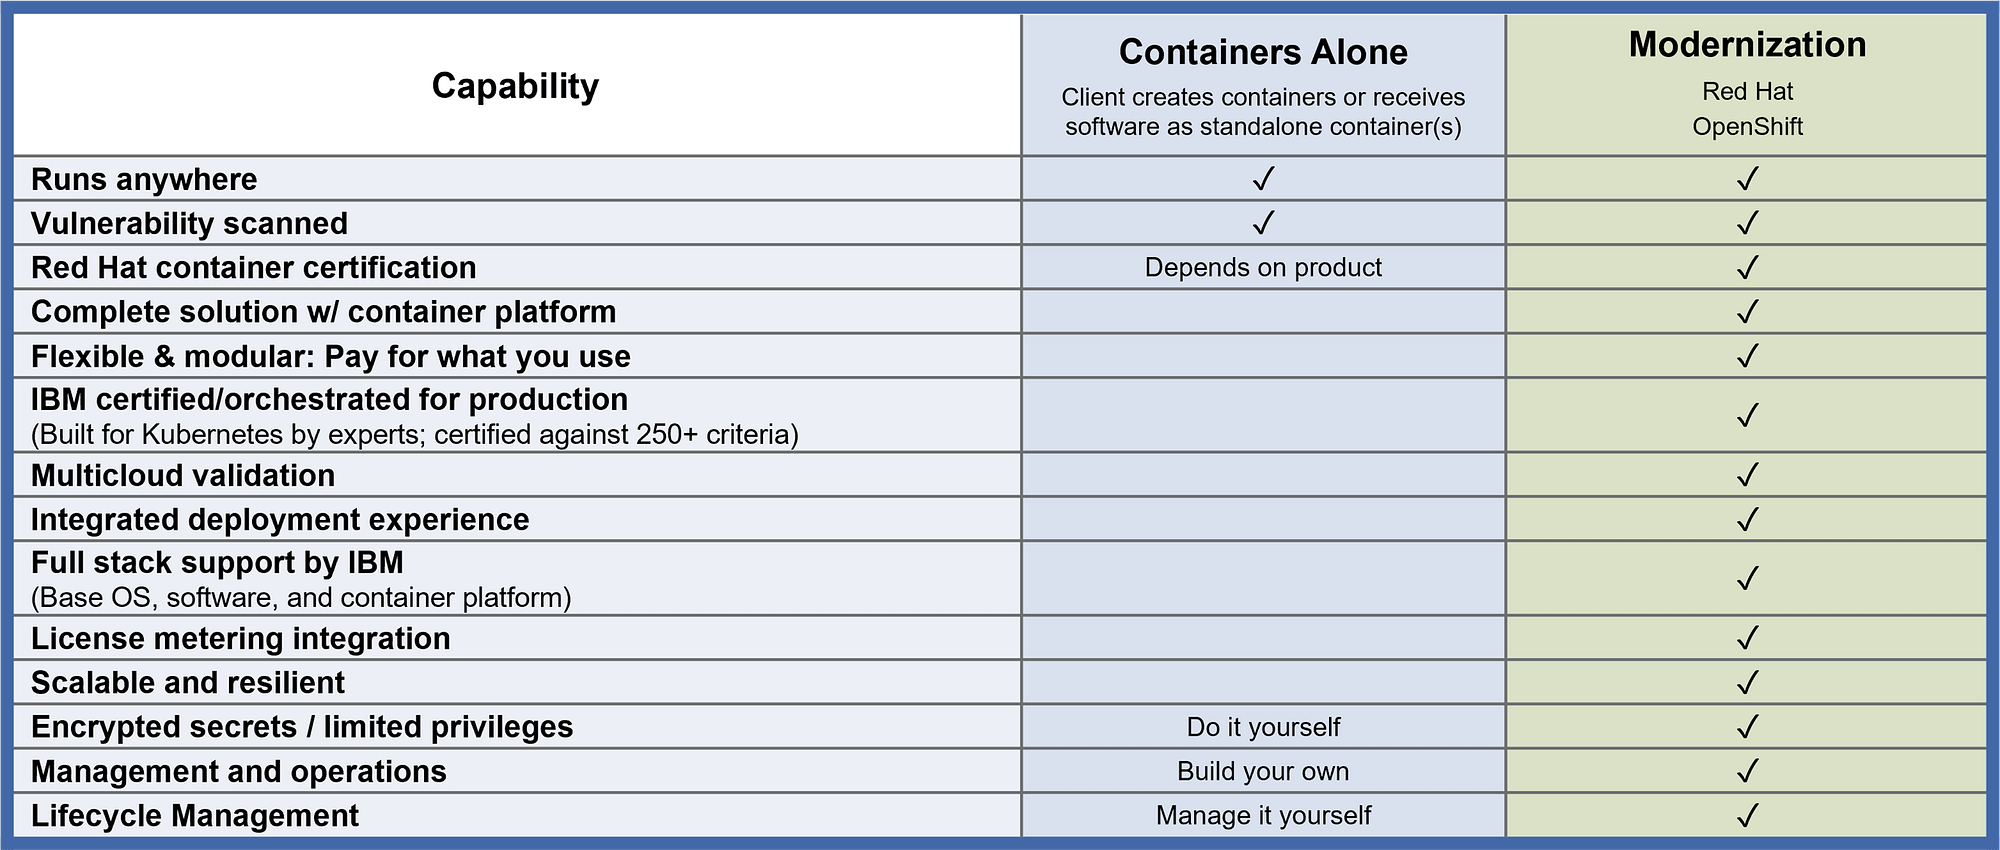 Red-Hat-OpenShift-Containers